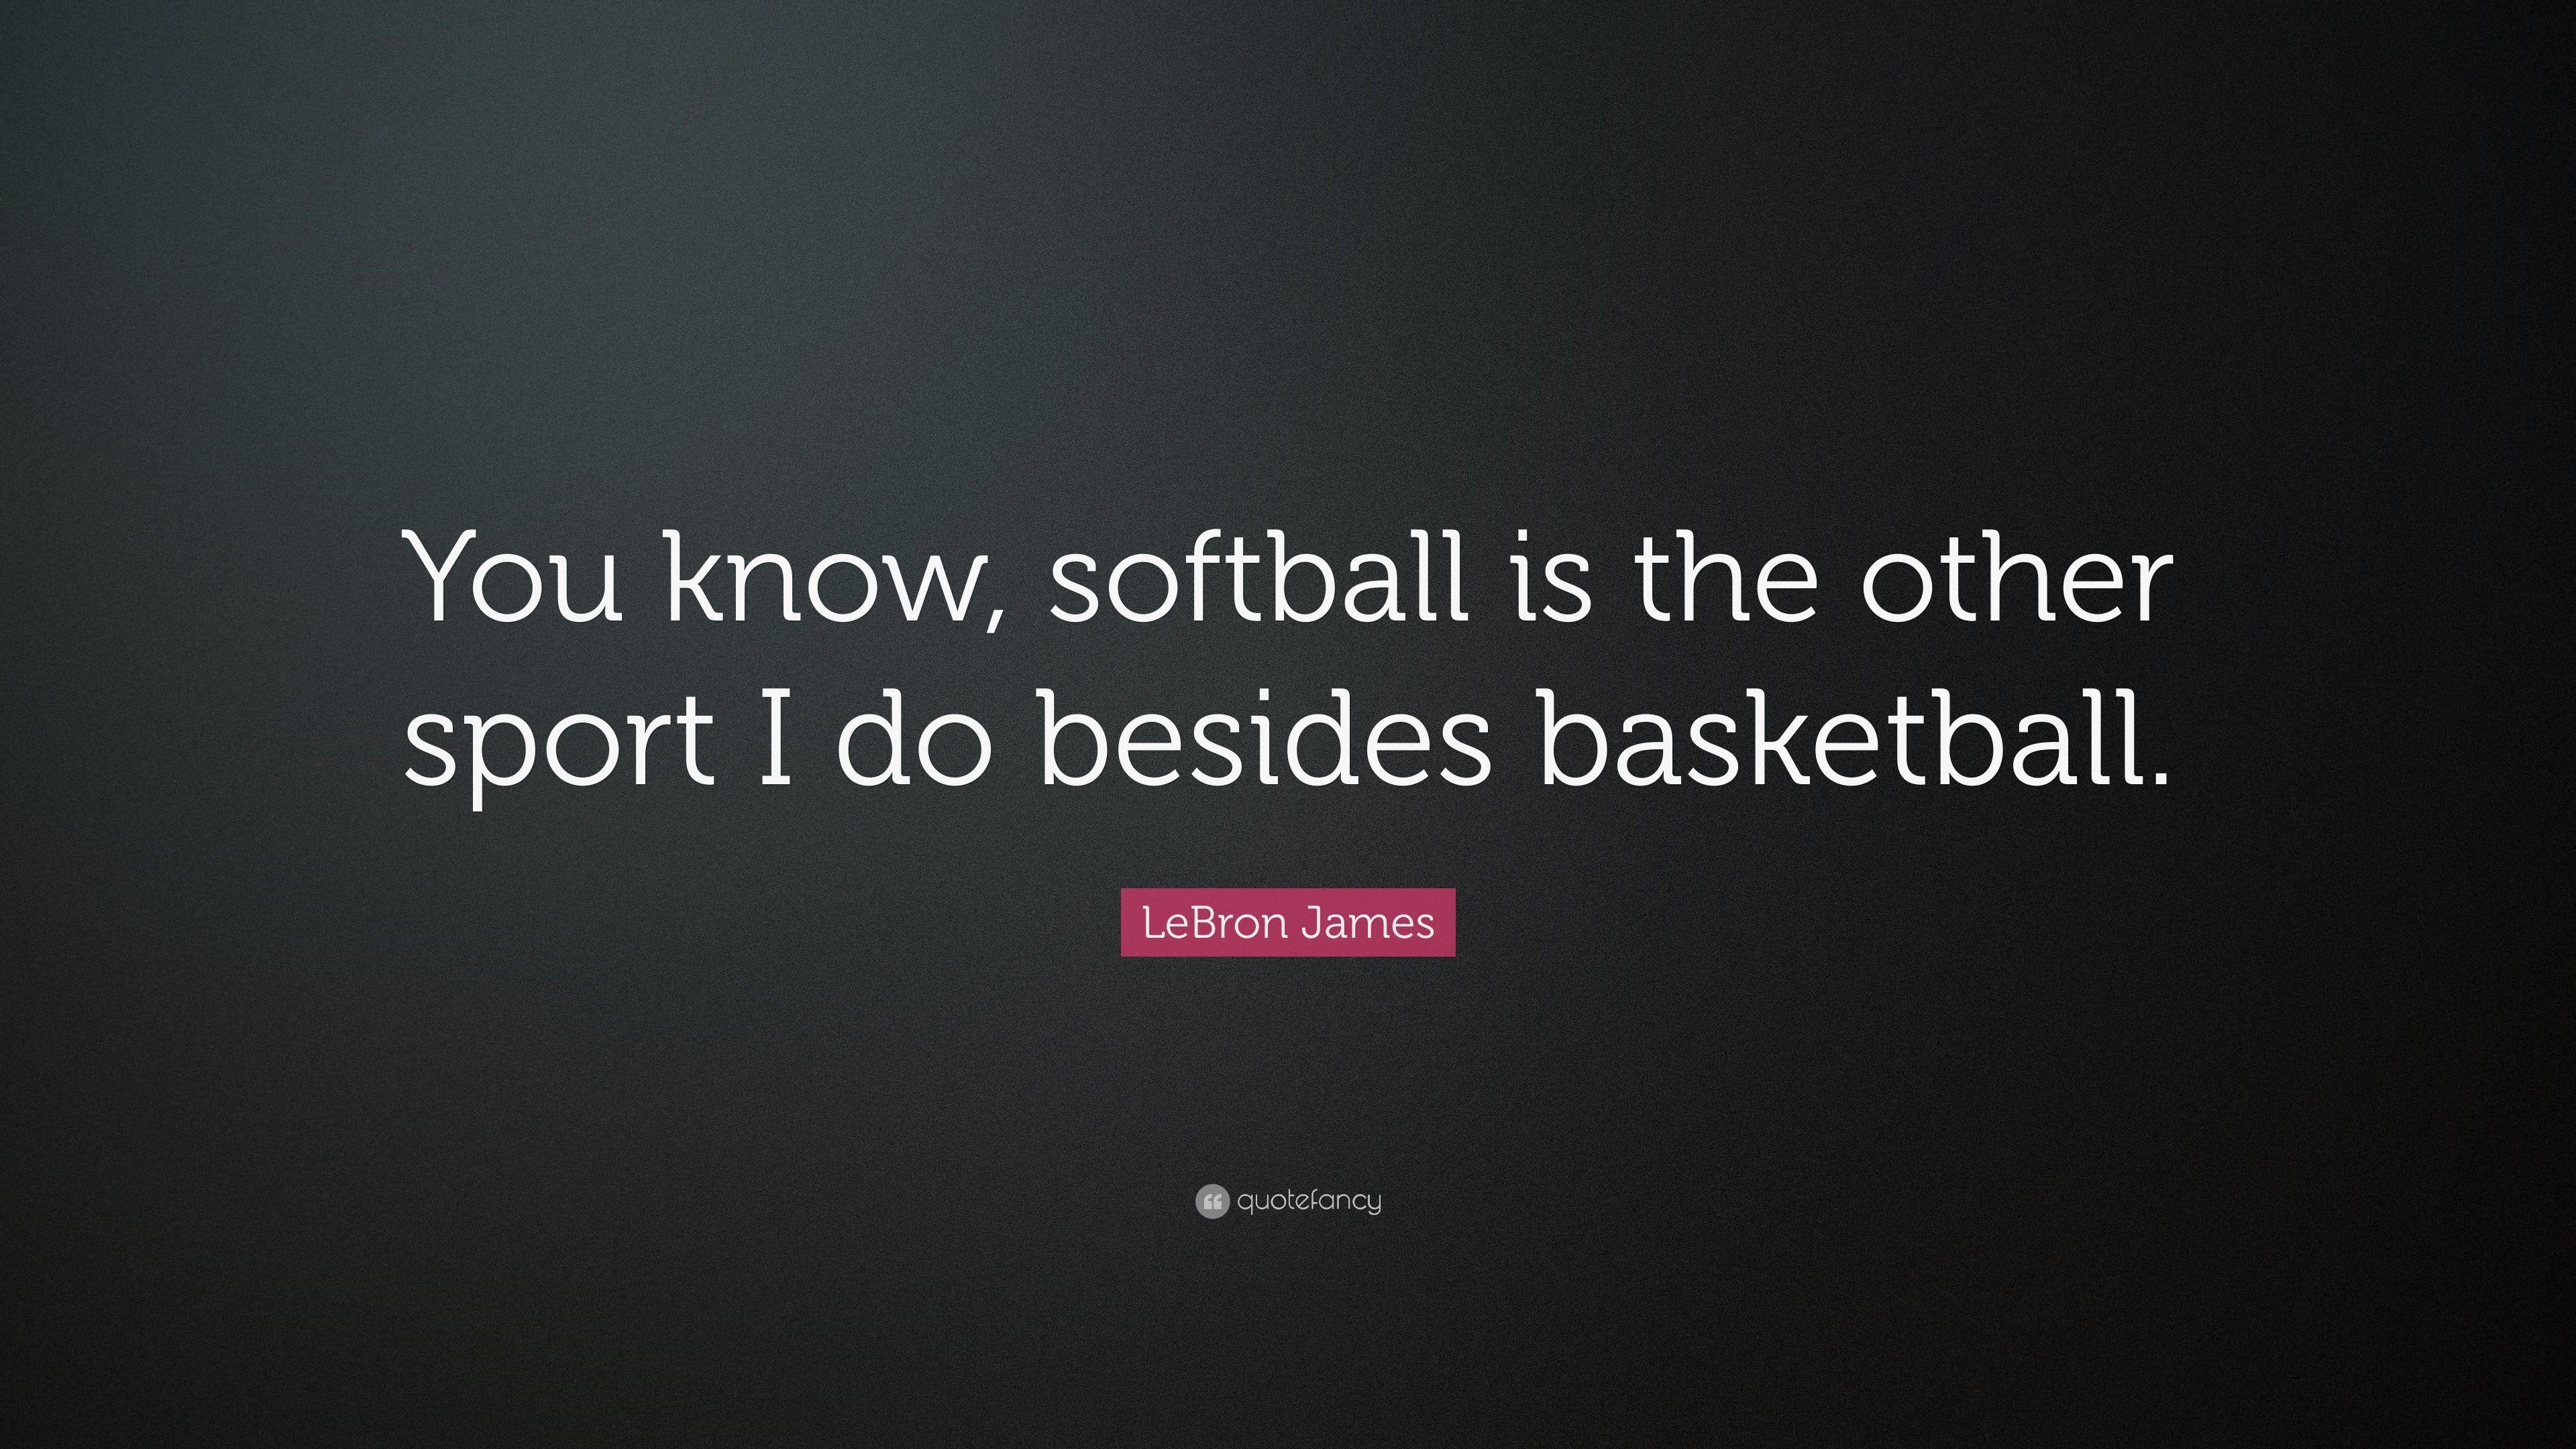 LeBron James Quote: “You know, softball is the other sport I do